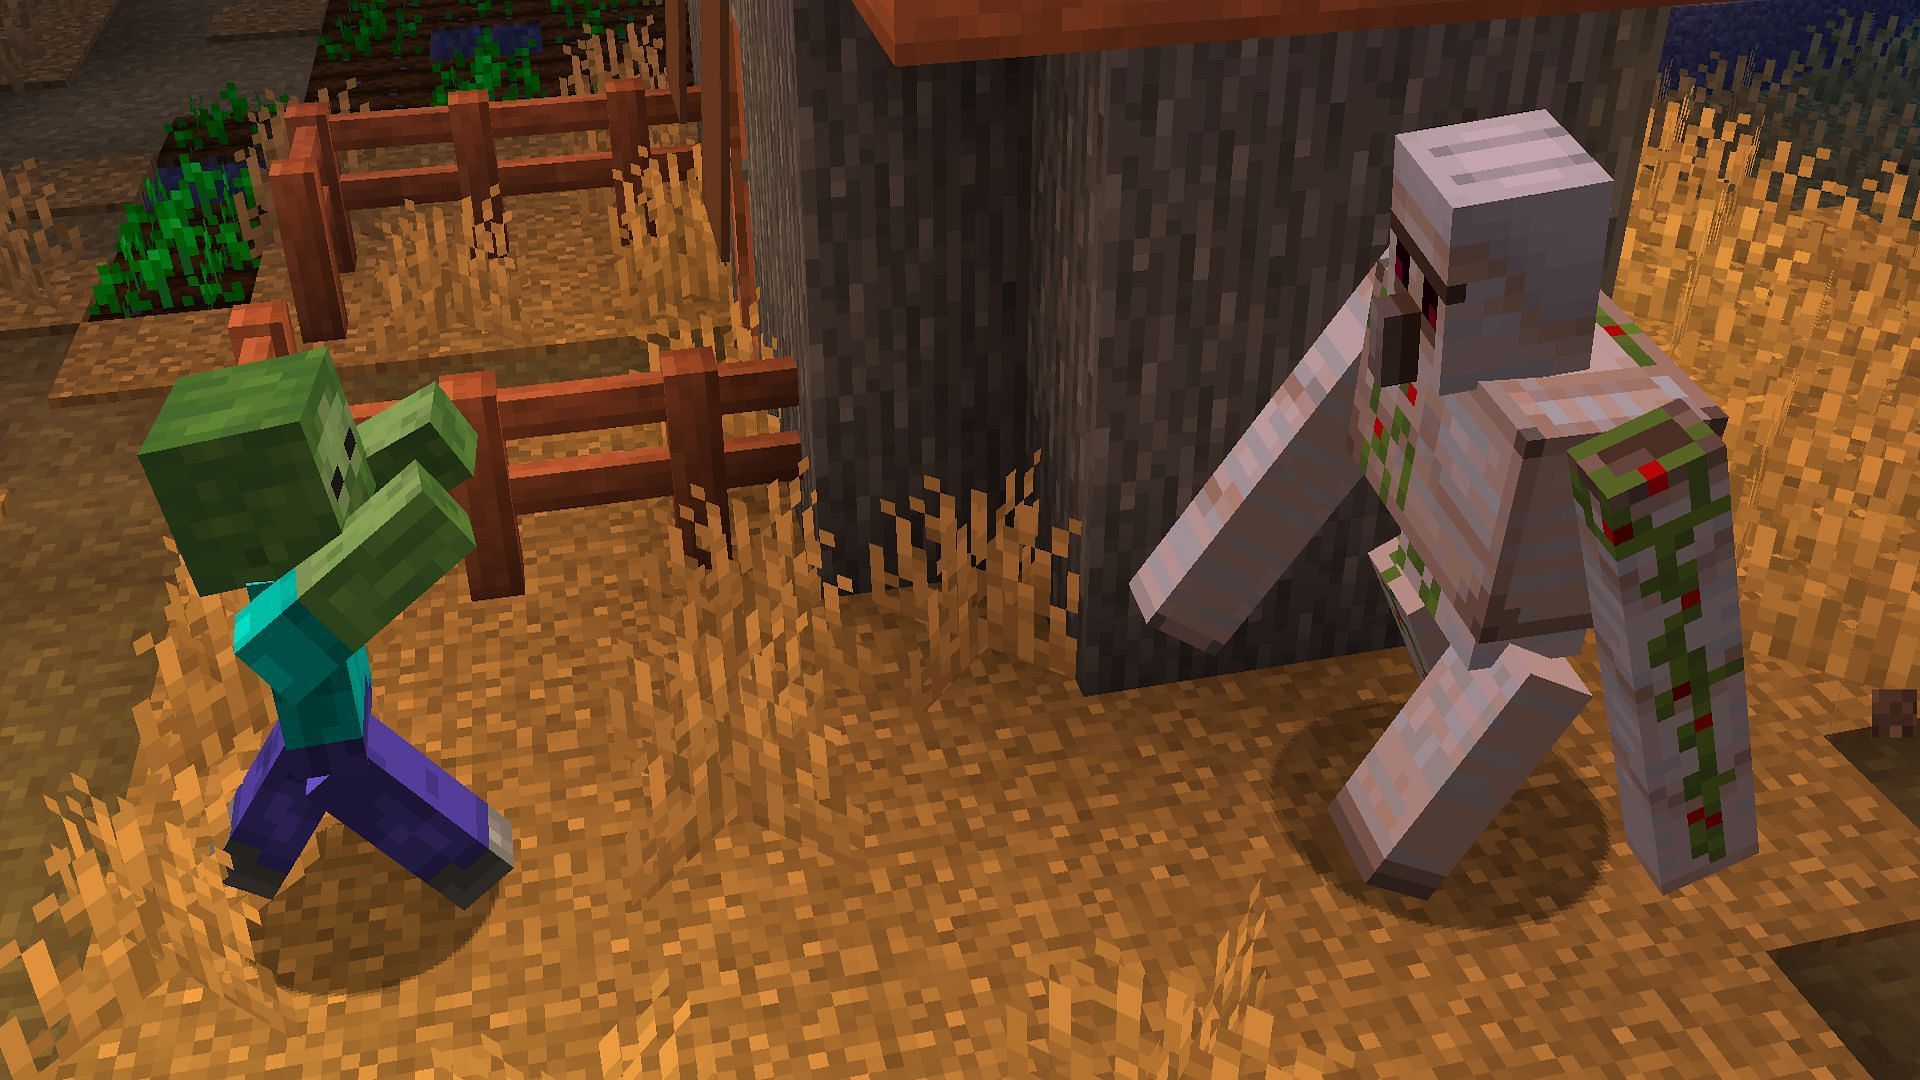 Iron golems will fight more than hostile mobs if forced to (Image via Mojang)